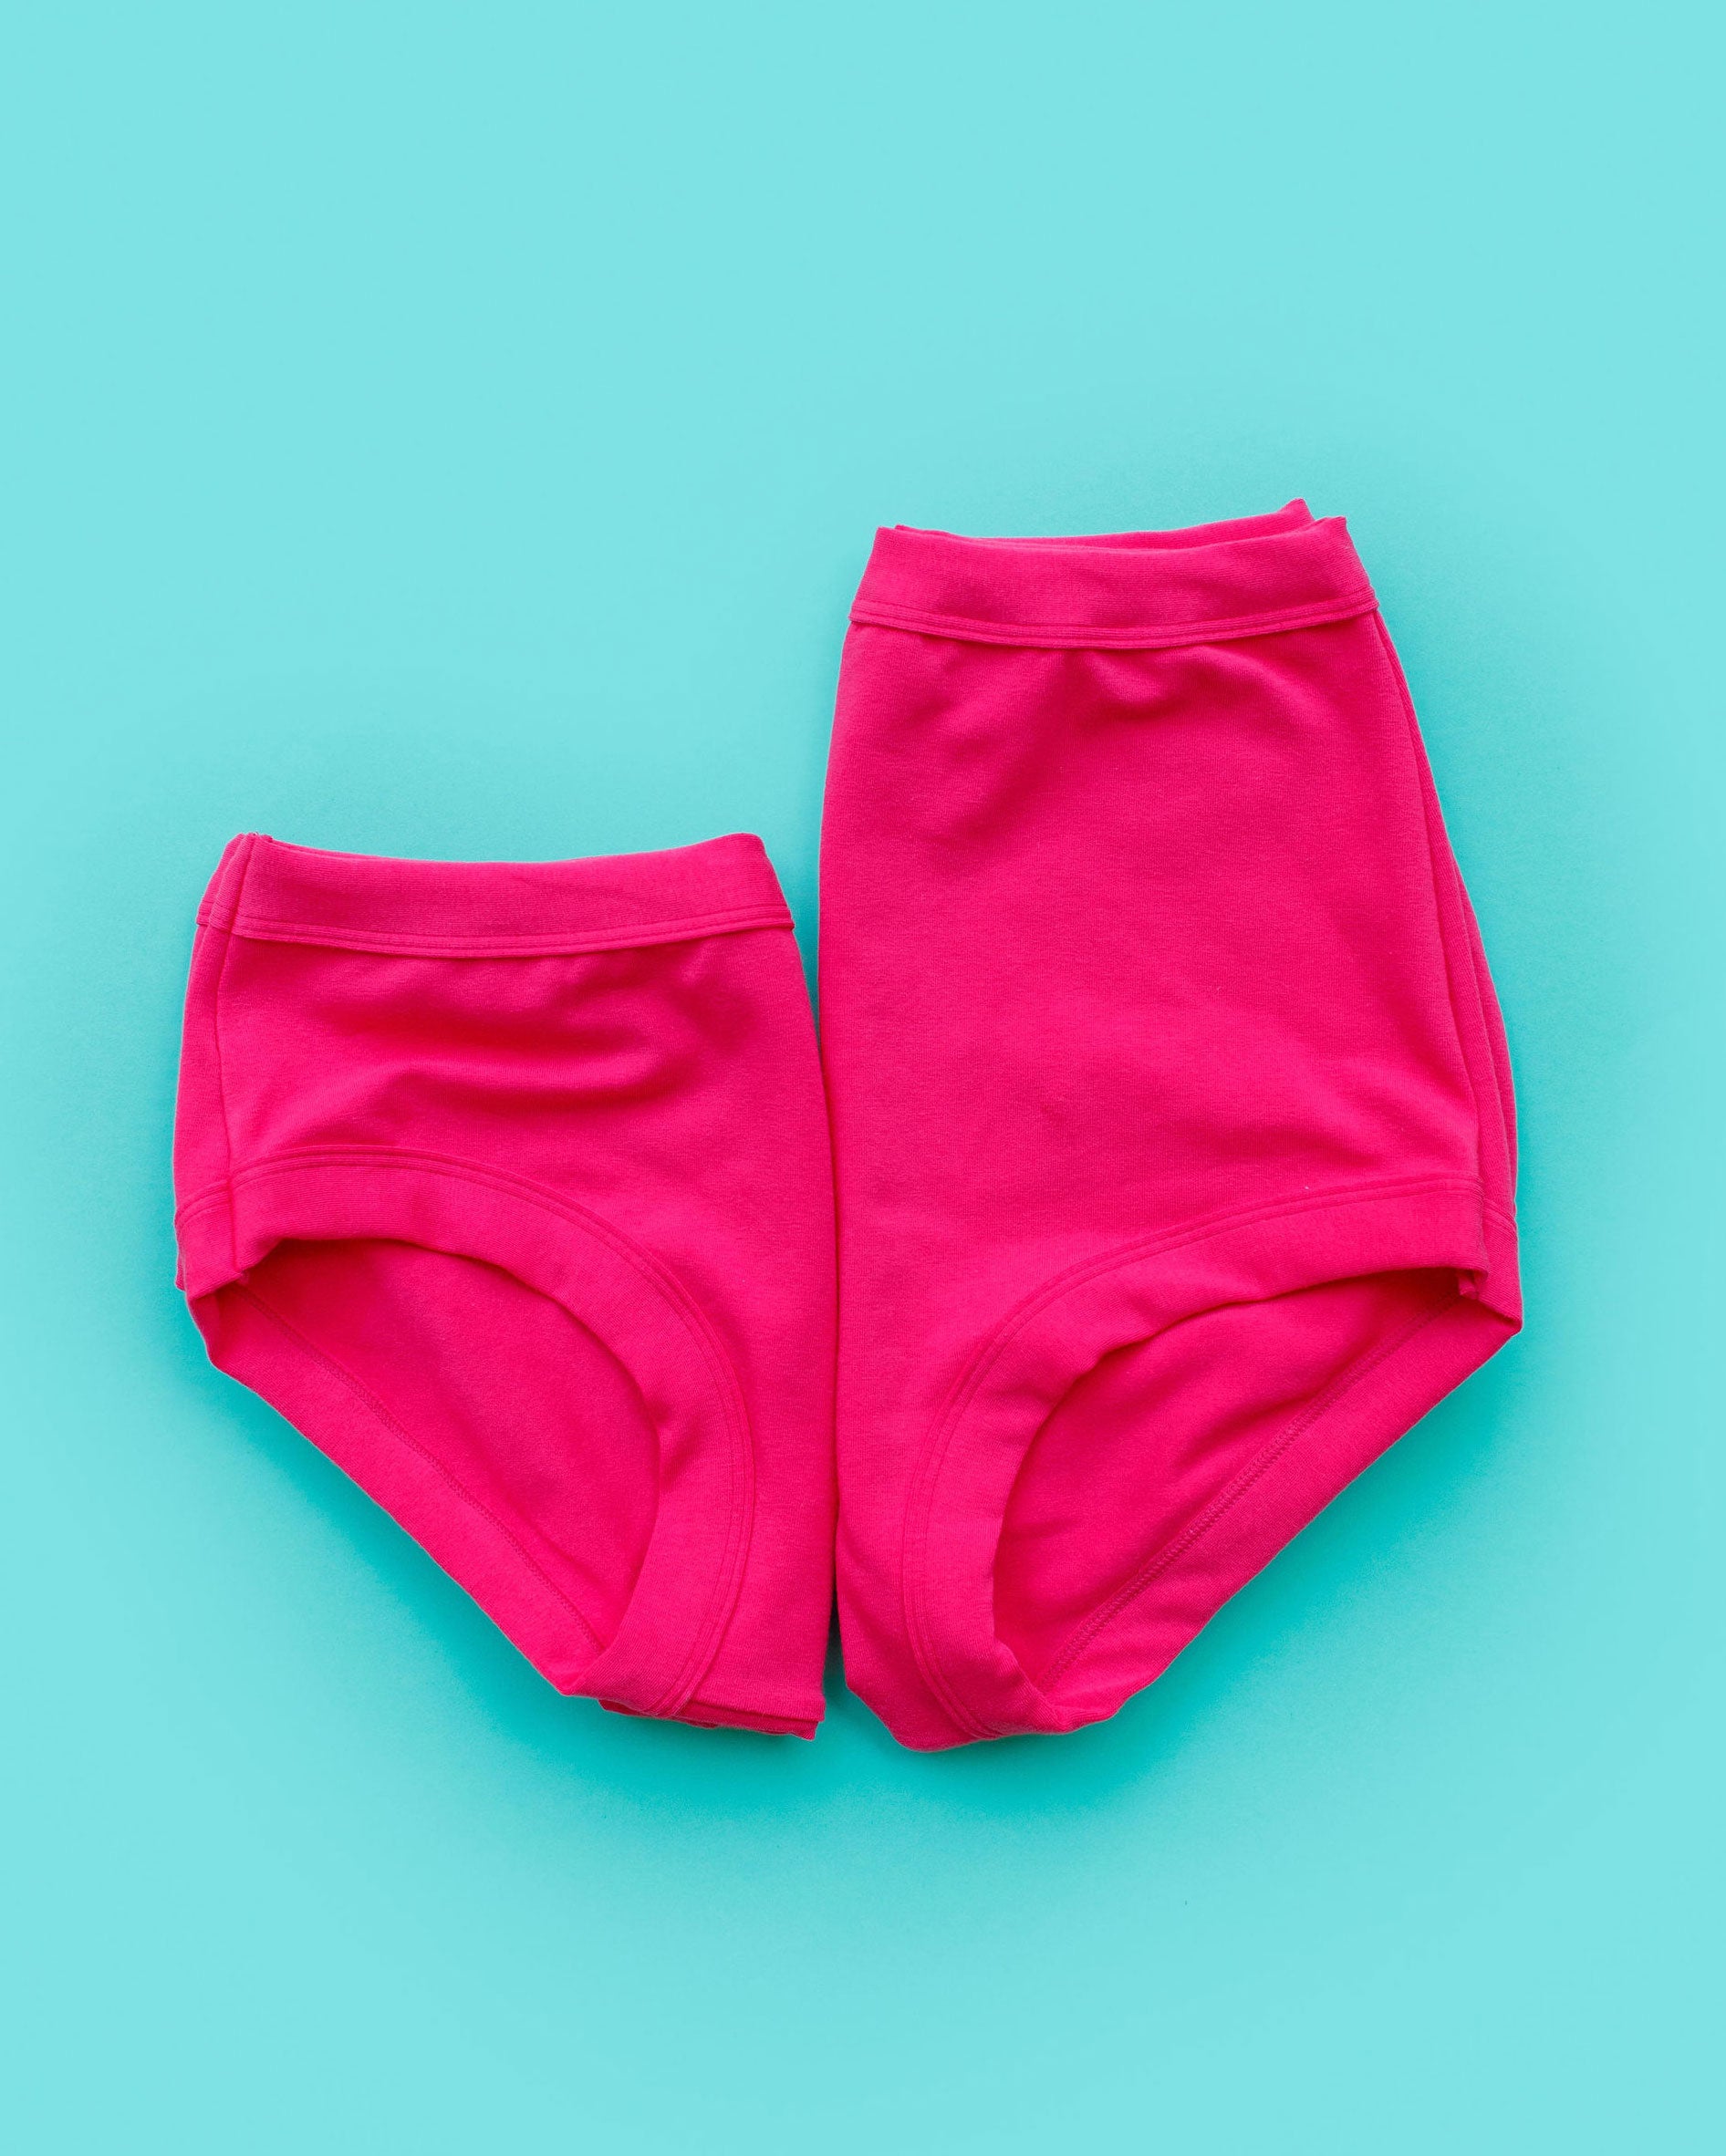 Flat lay of two folded Thunderpants Hipster style and Sky Rise style underwear in a hot pink color.